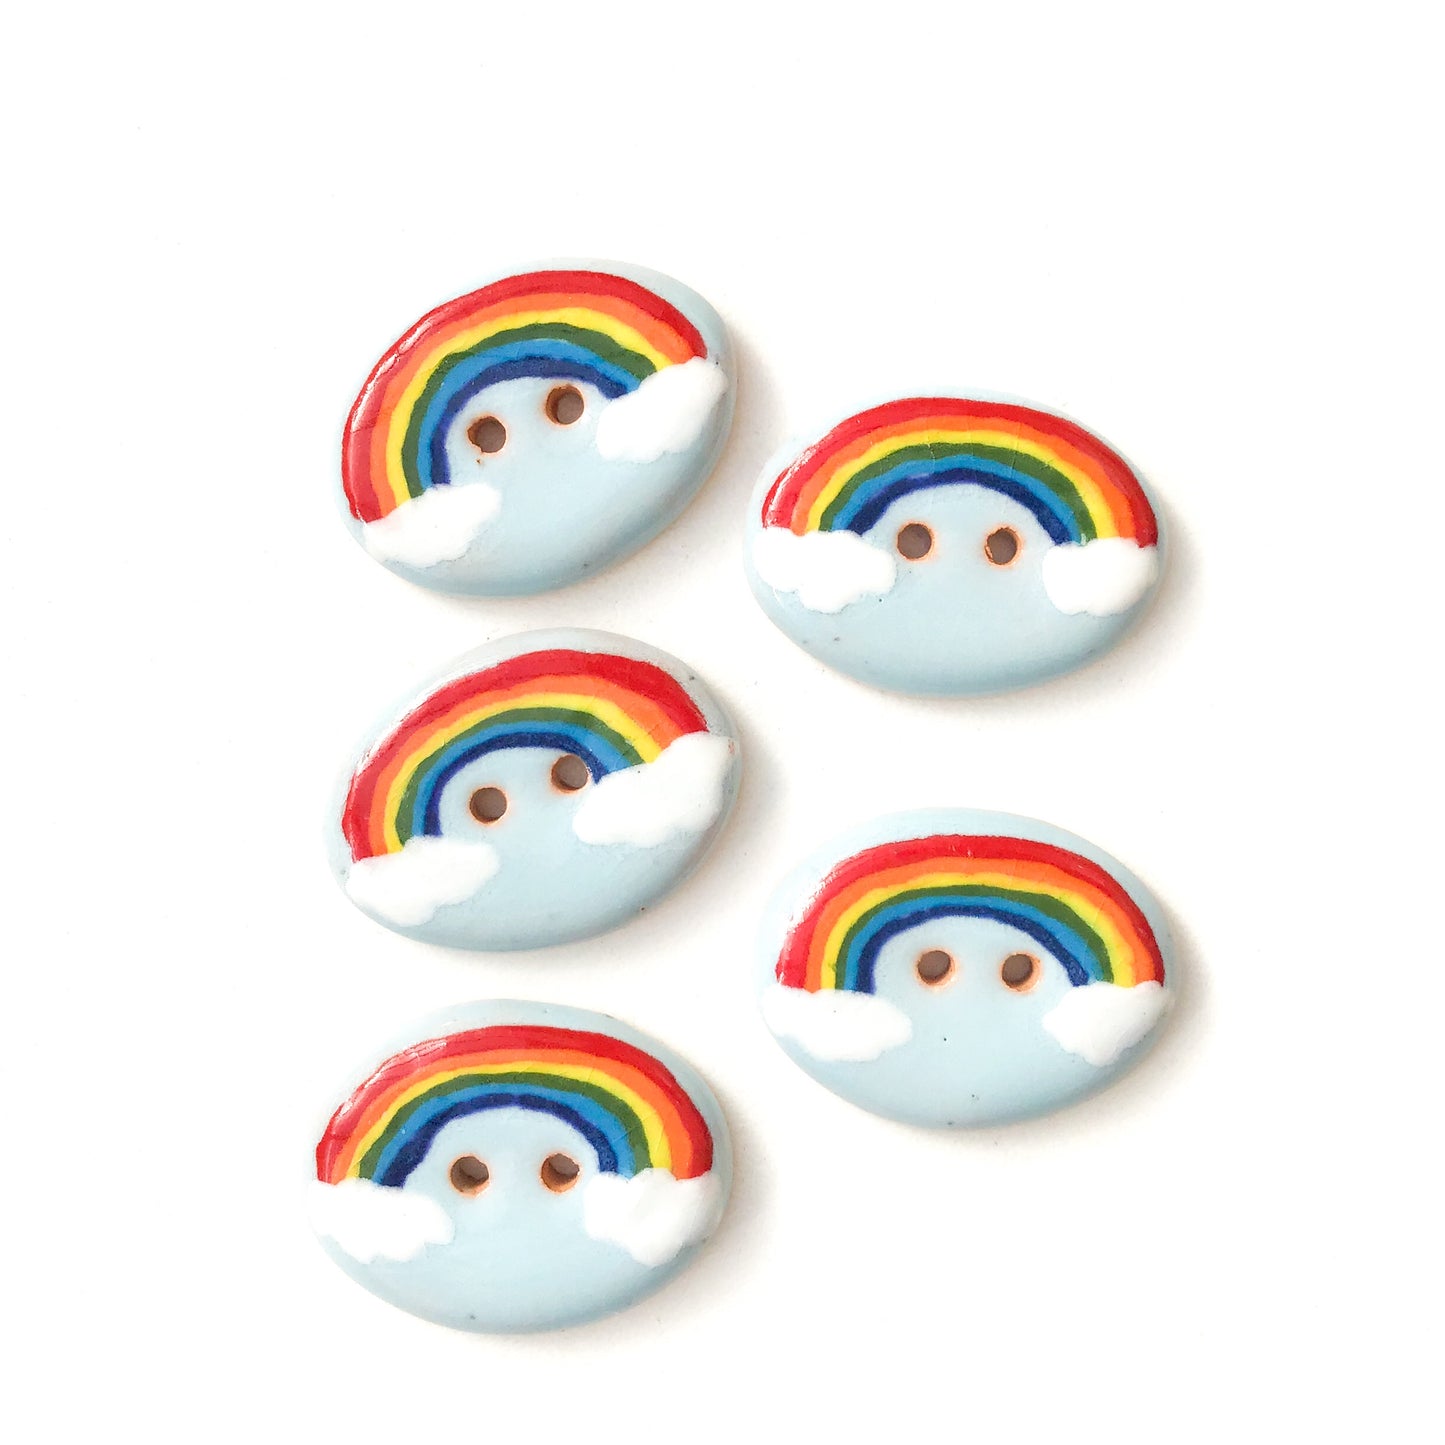 Over the Rainbow Buttons - Ceramic Rainbow Buttons - 3/4" x 1 1/8"